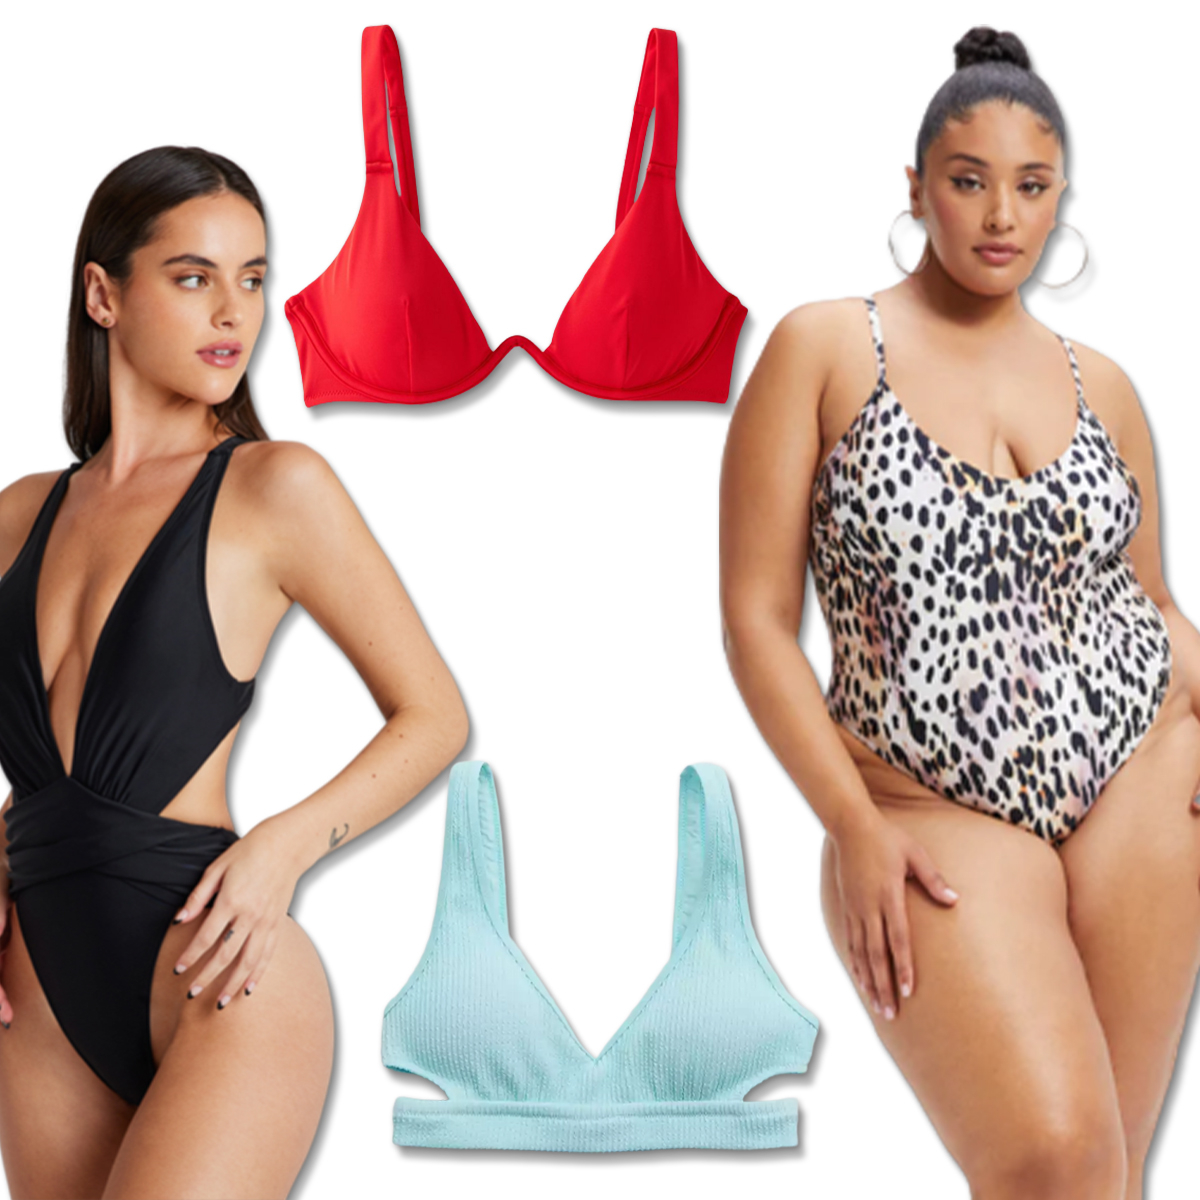 Shop Our Top Swimwear Finds That Are Cute, Affordable & Supportive